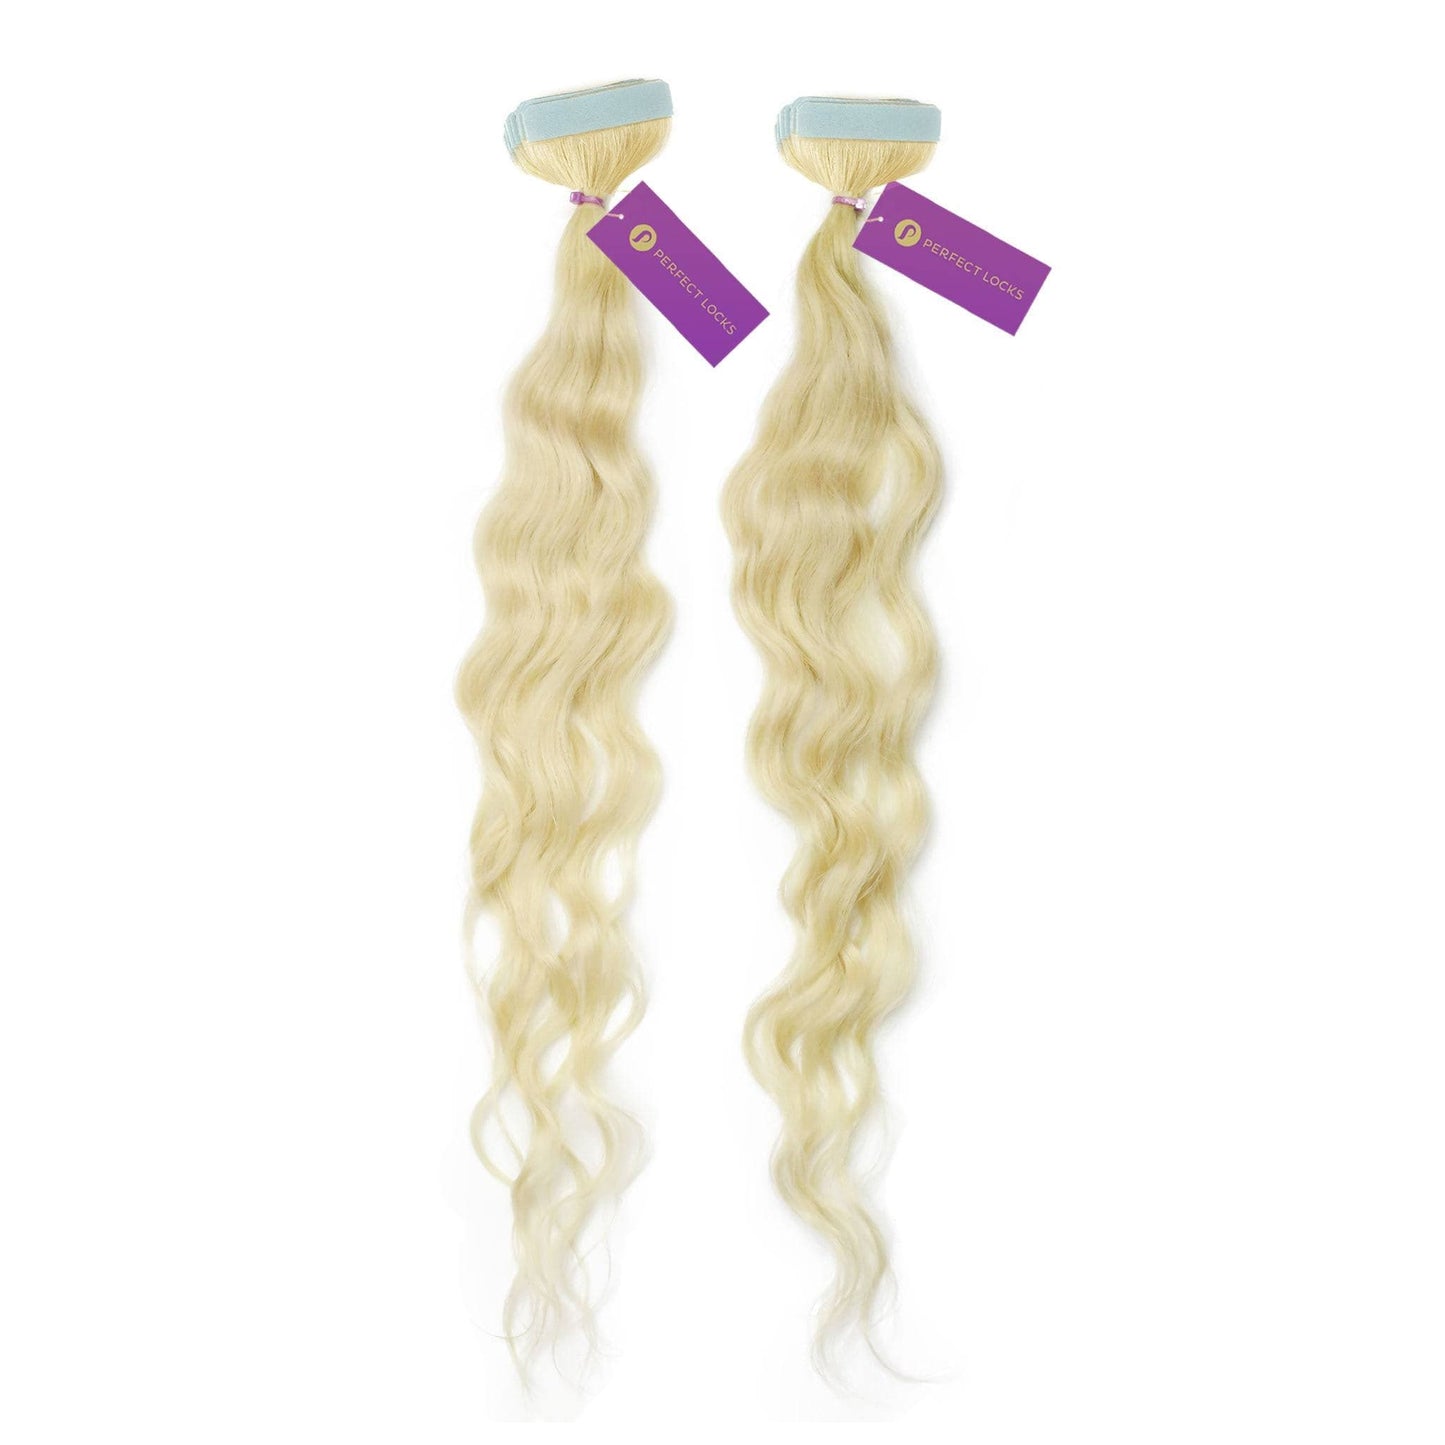 2 x Wavy Tape-In Hair Extension Bundle Deal (20 Pieces)